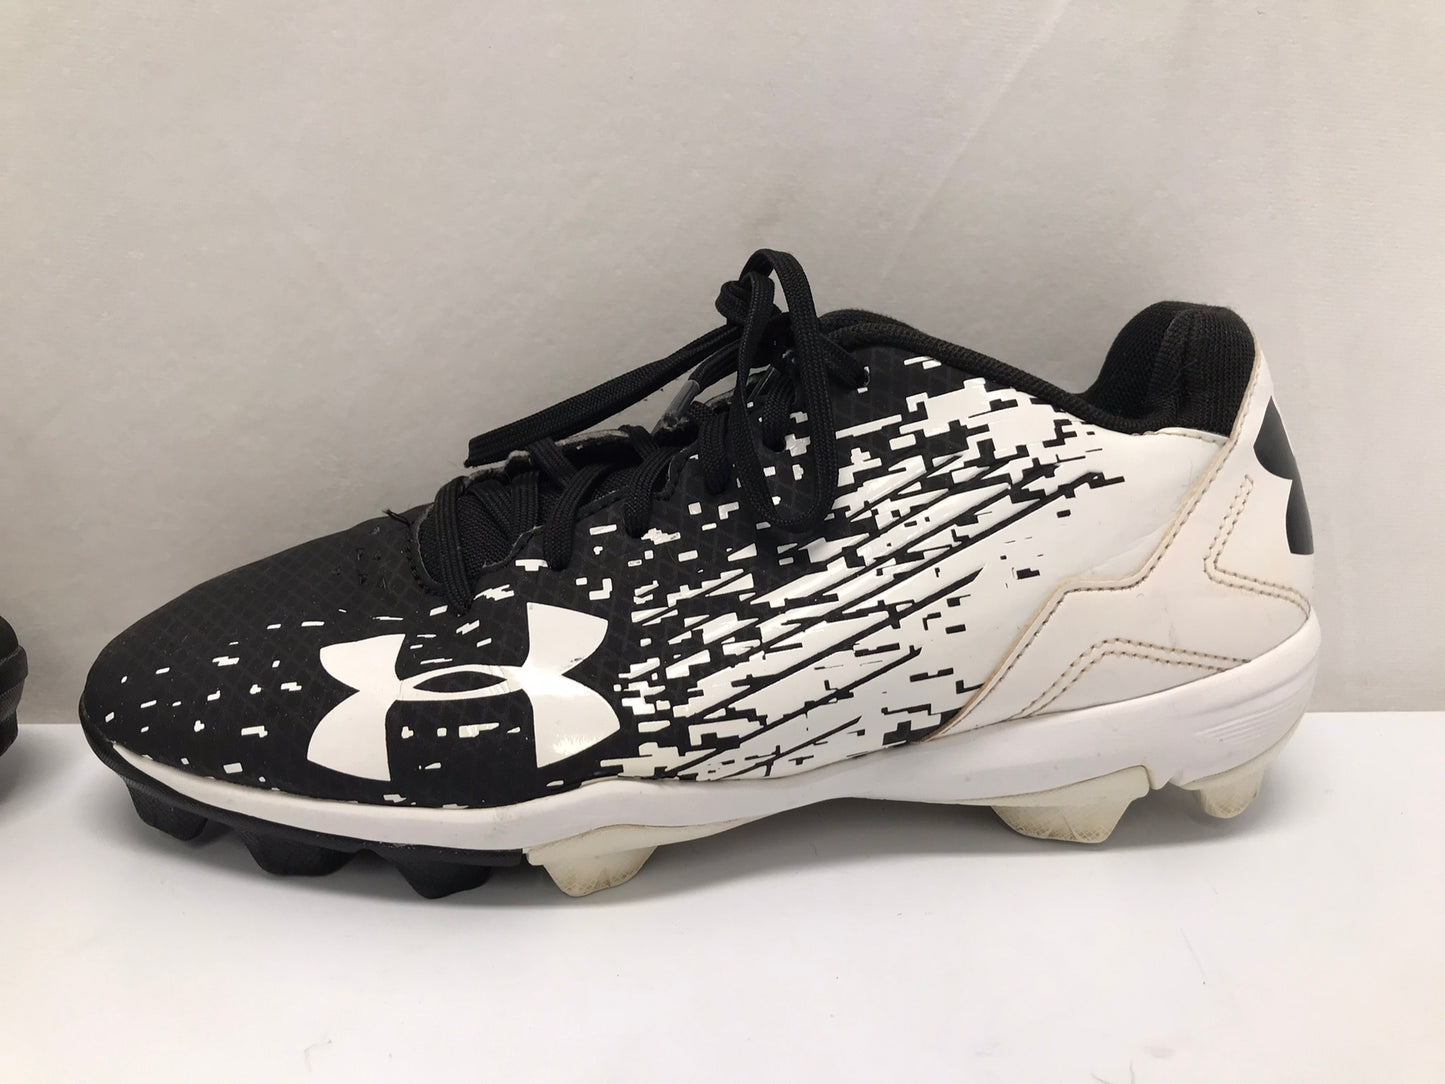 Baseball Shoes Cleats Child Size 6 Youth Under Armour Black White Excellent